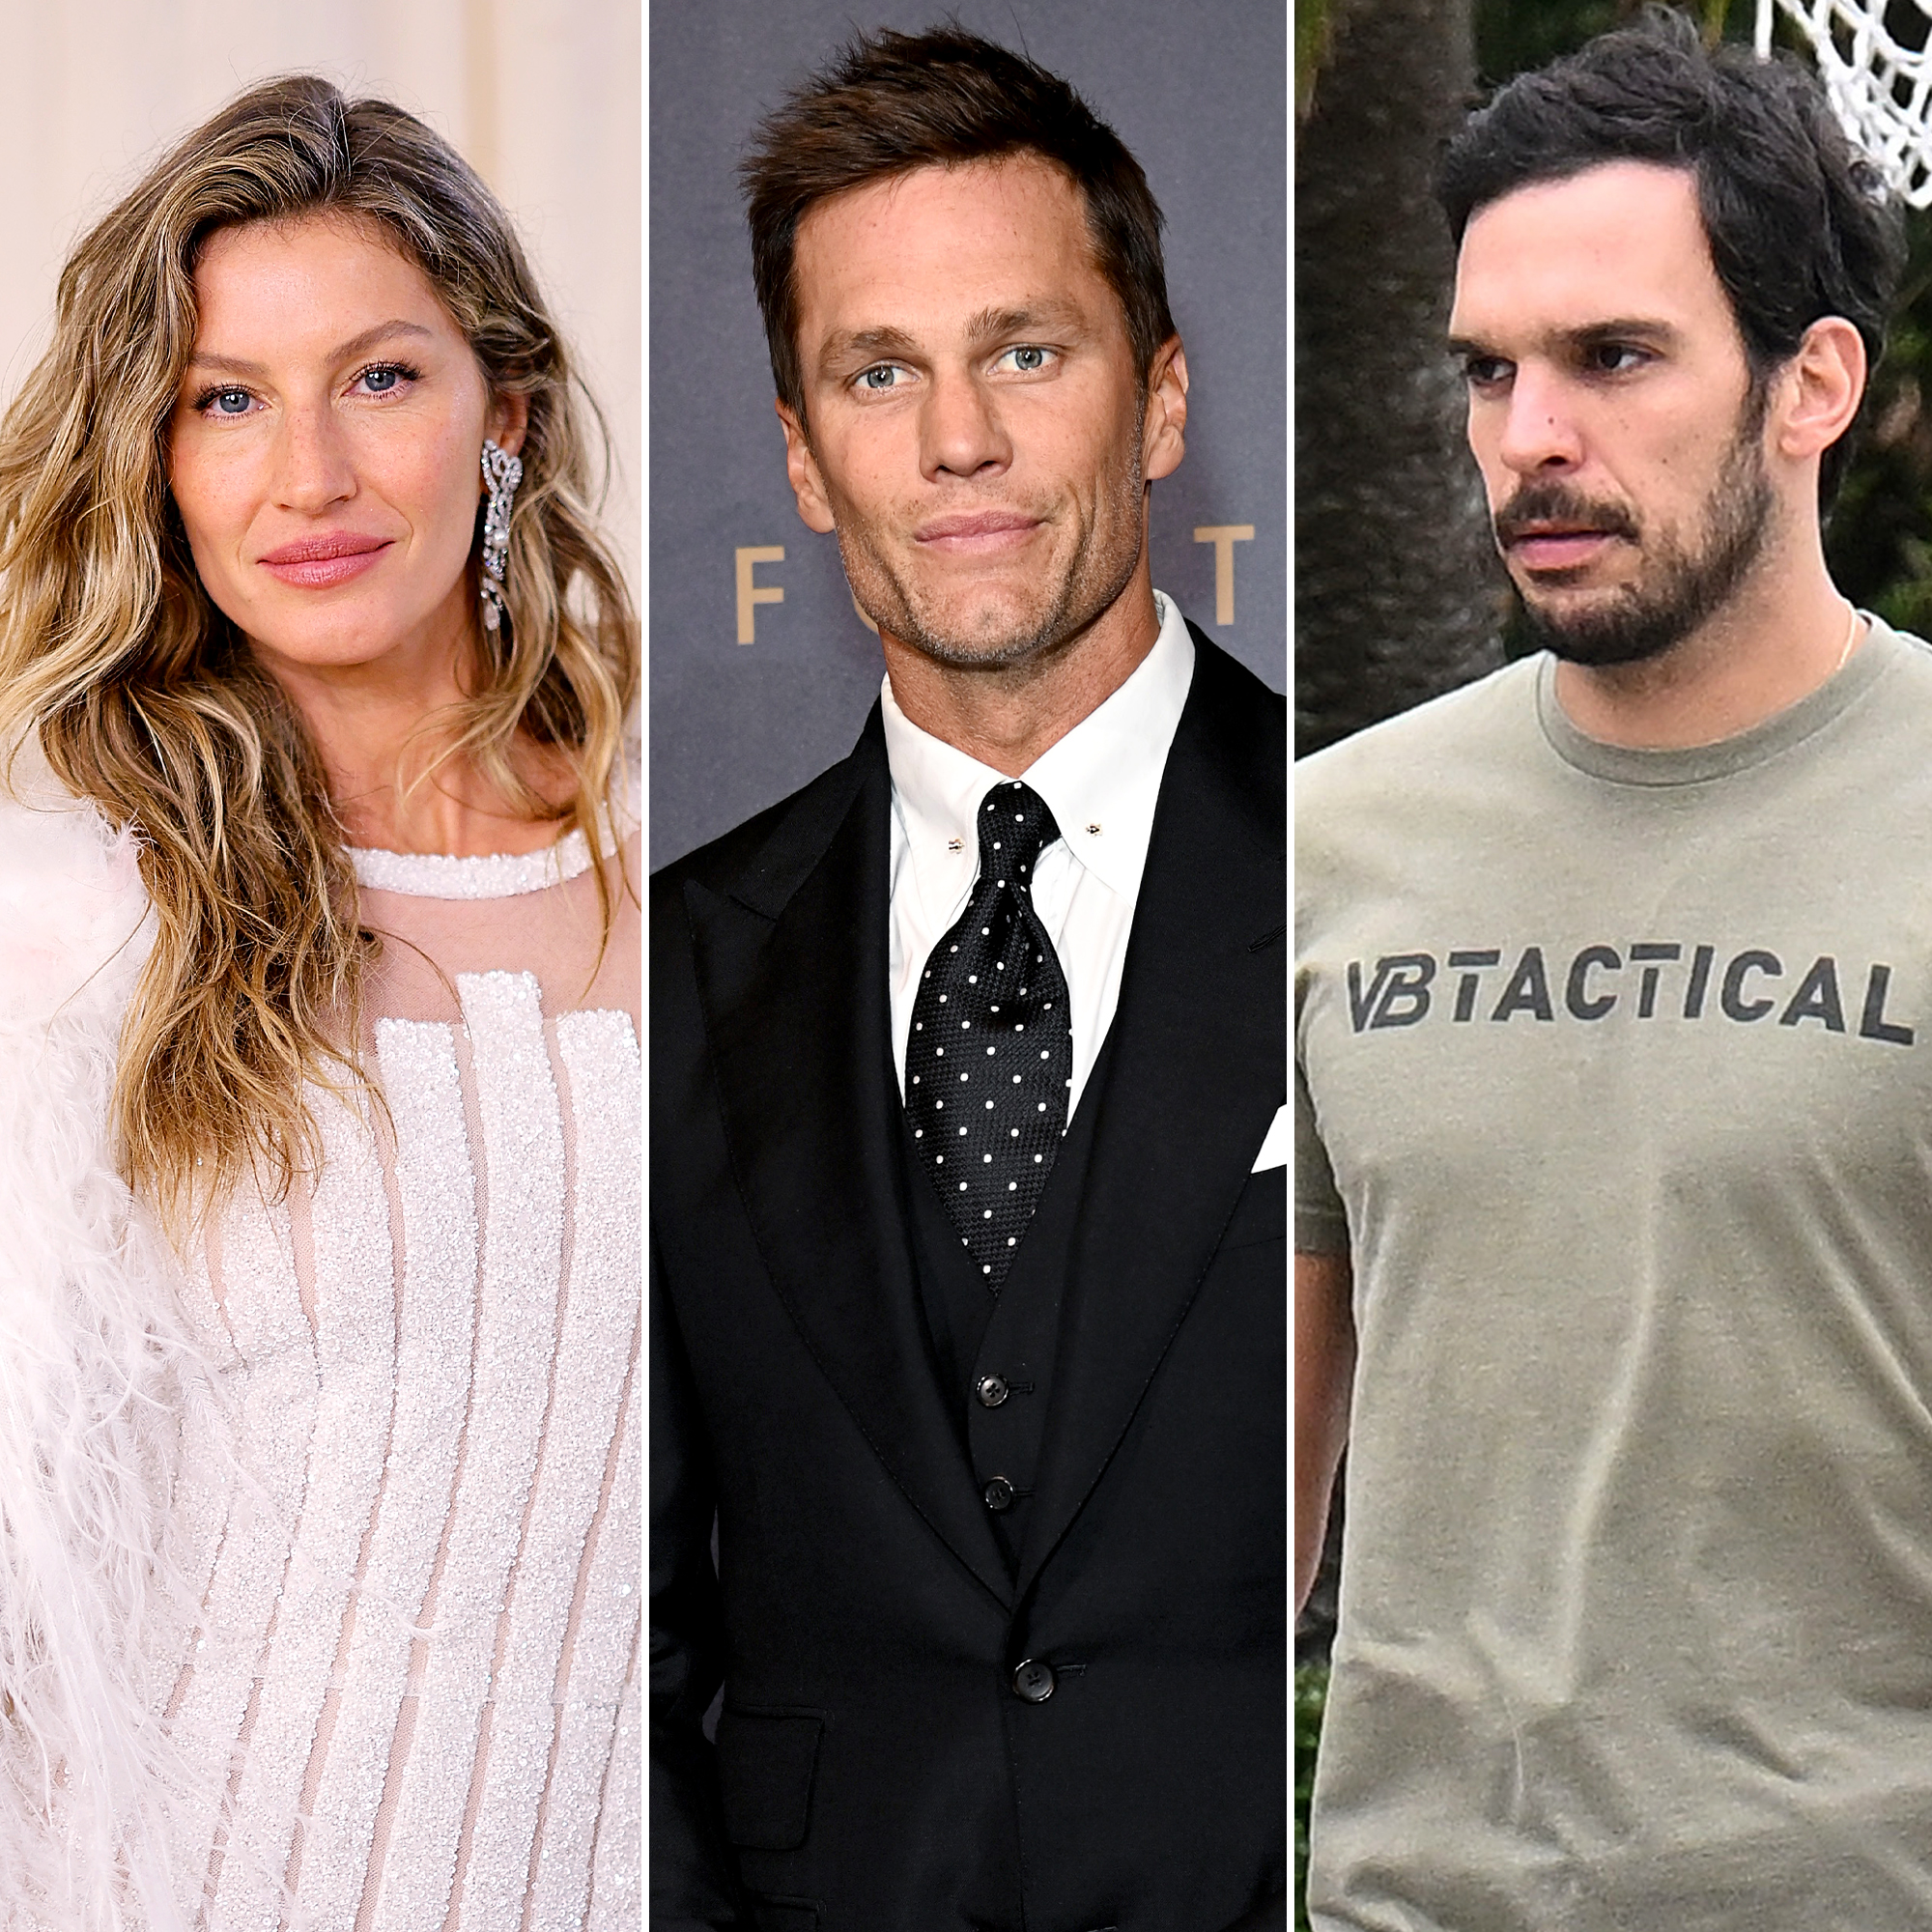 Gisele Bündchen Says She's Labeled 'Unfaithful' For Having 'Courage' To  Leave An 'Unhealthy Relationship